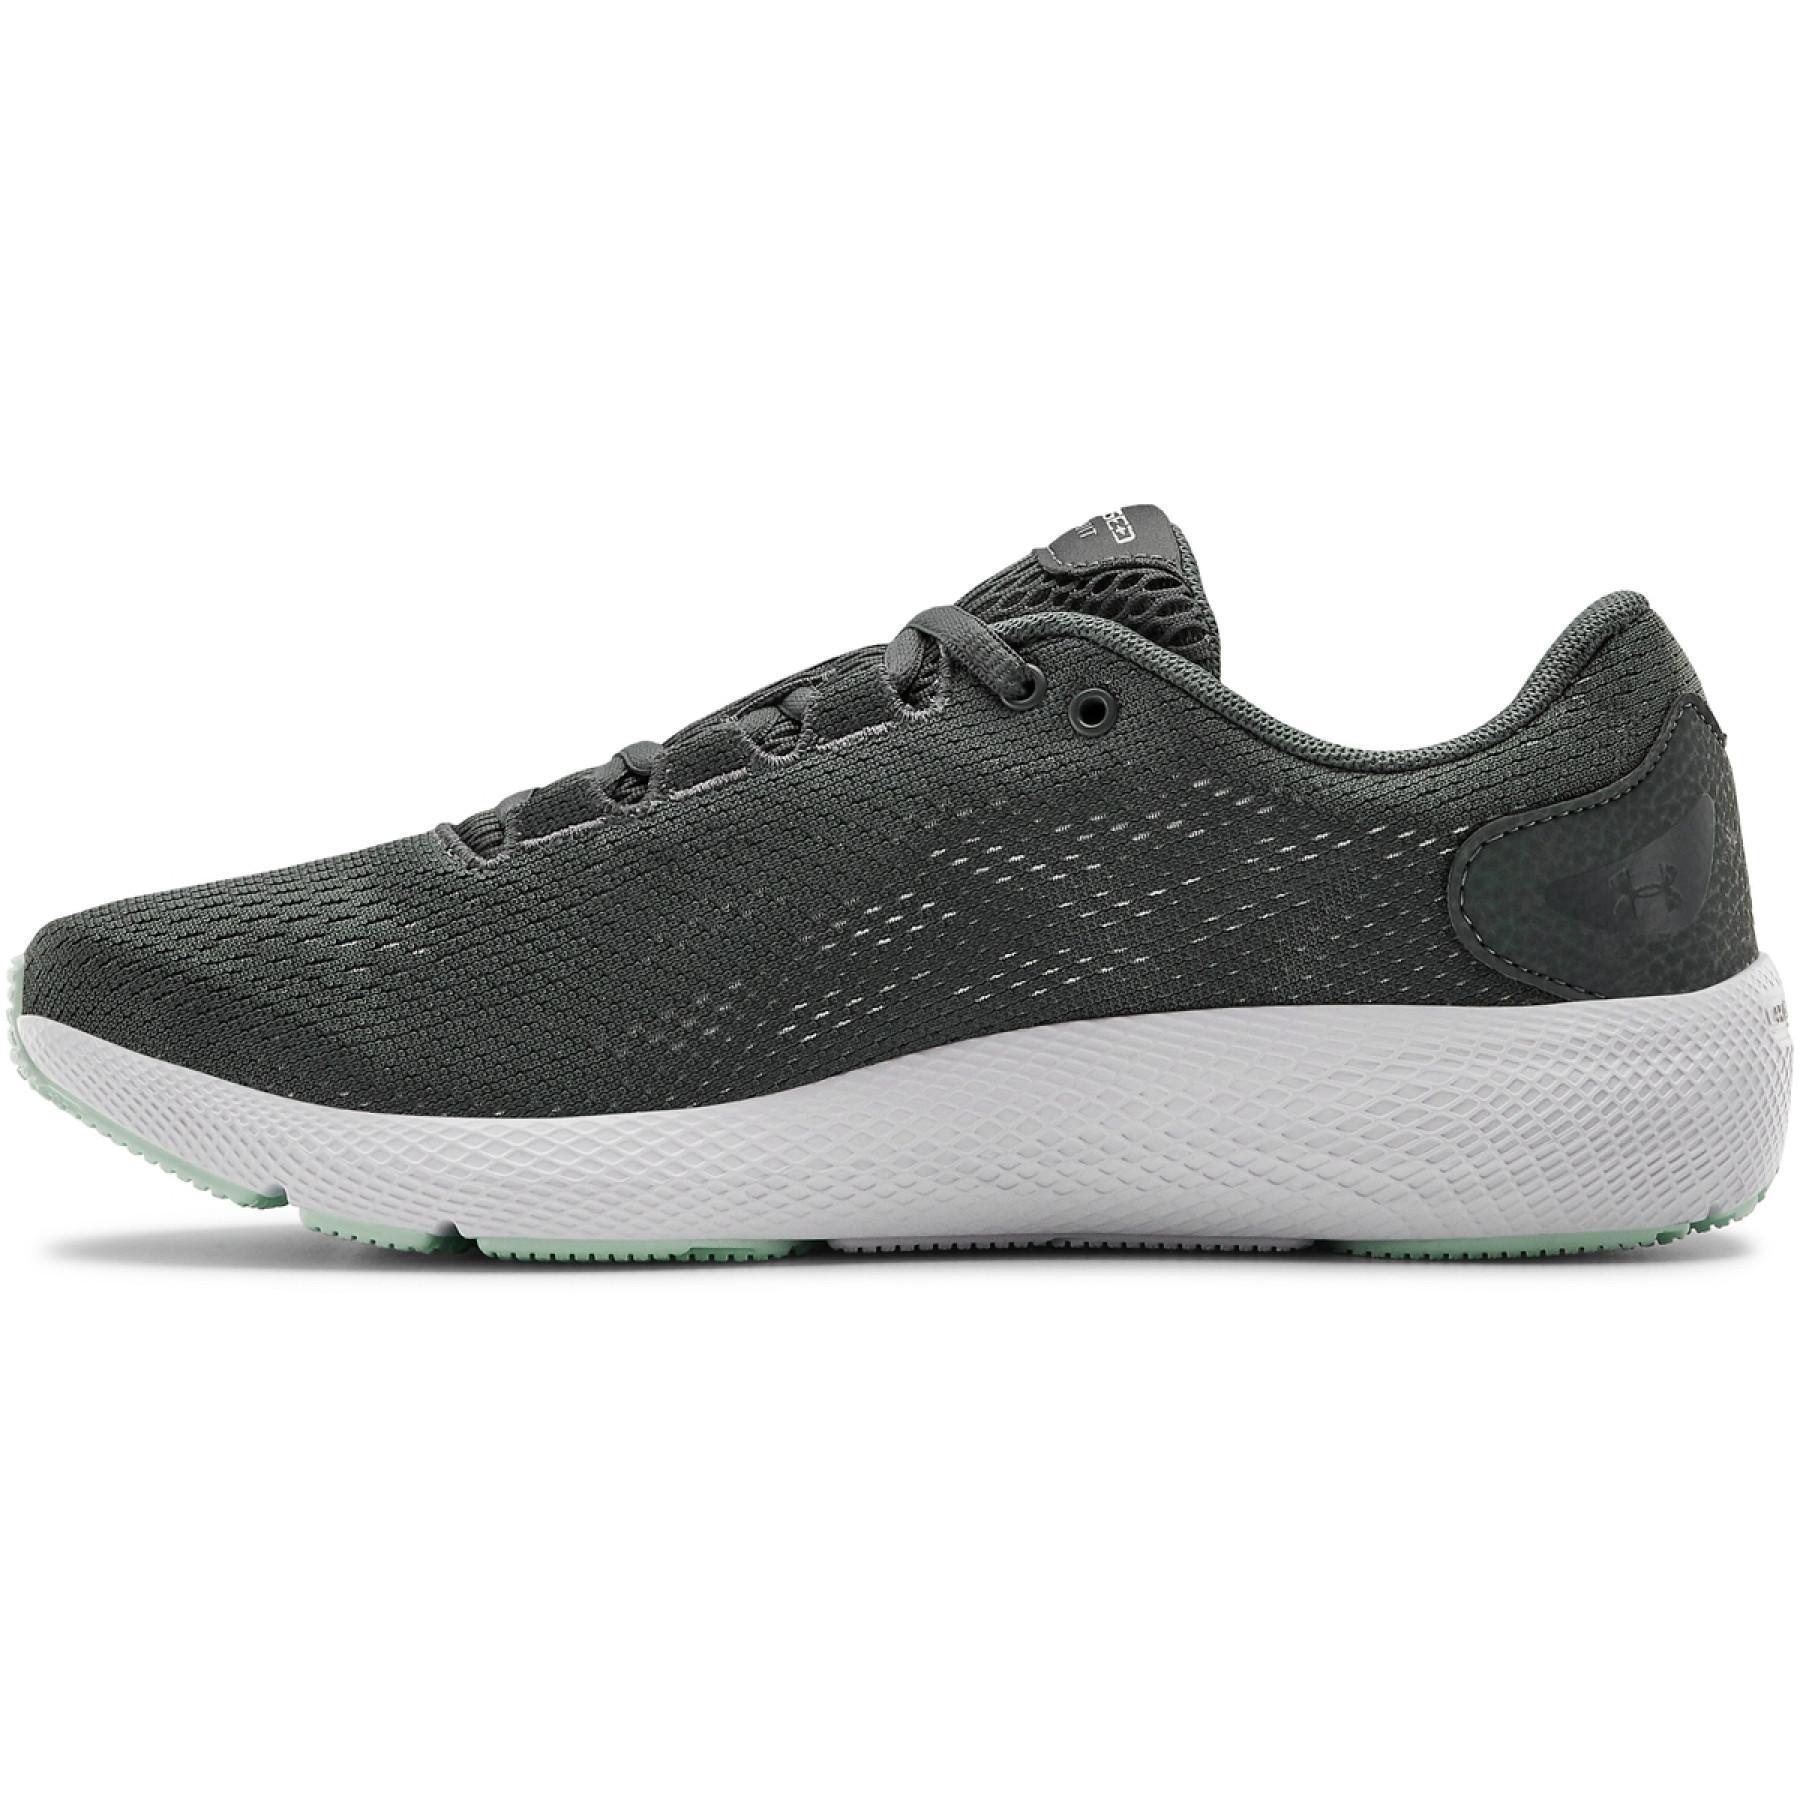 Women's running shoes Under Armour Charged Pursuit 2